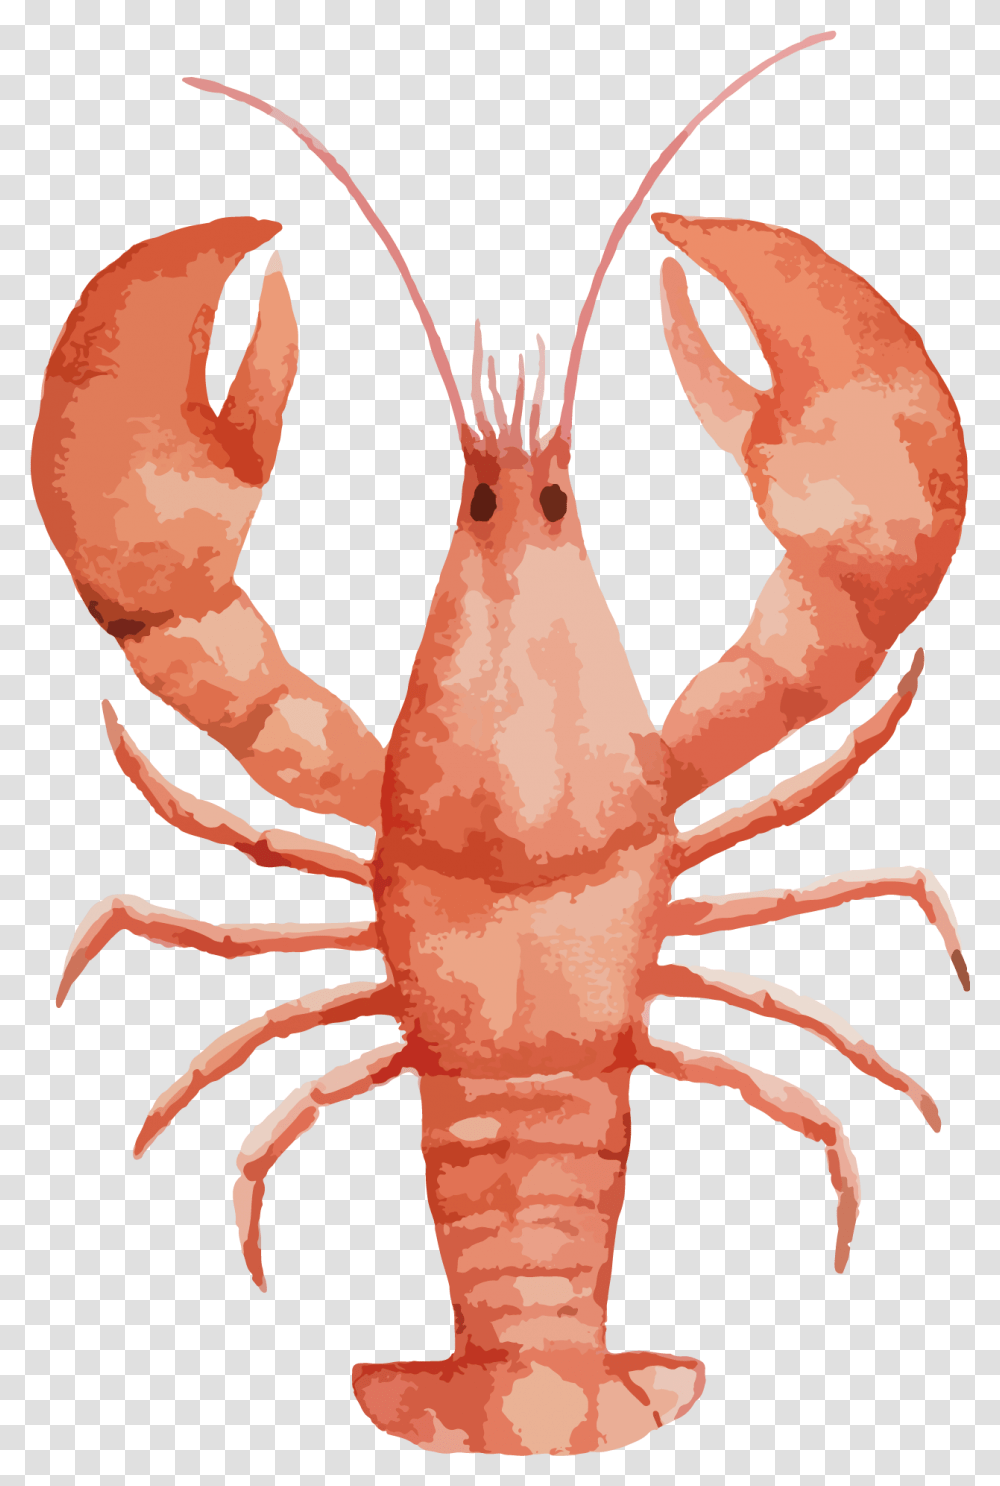 Lobster Watercolor Painting Seafood Painted Large Transprent Lobsters Mate For Life Friends, Sea Life, Animal, Crawdad, Bird Transparent Png